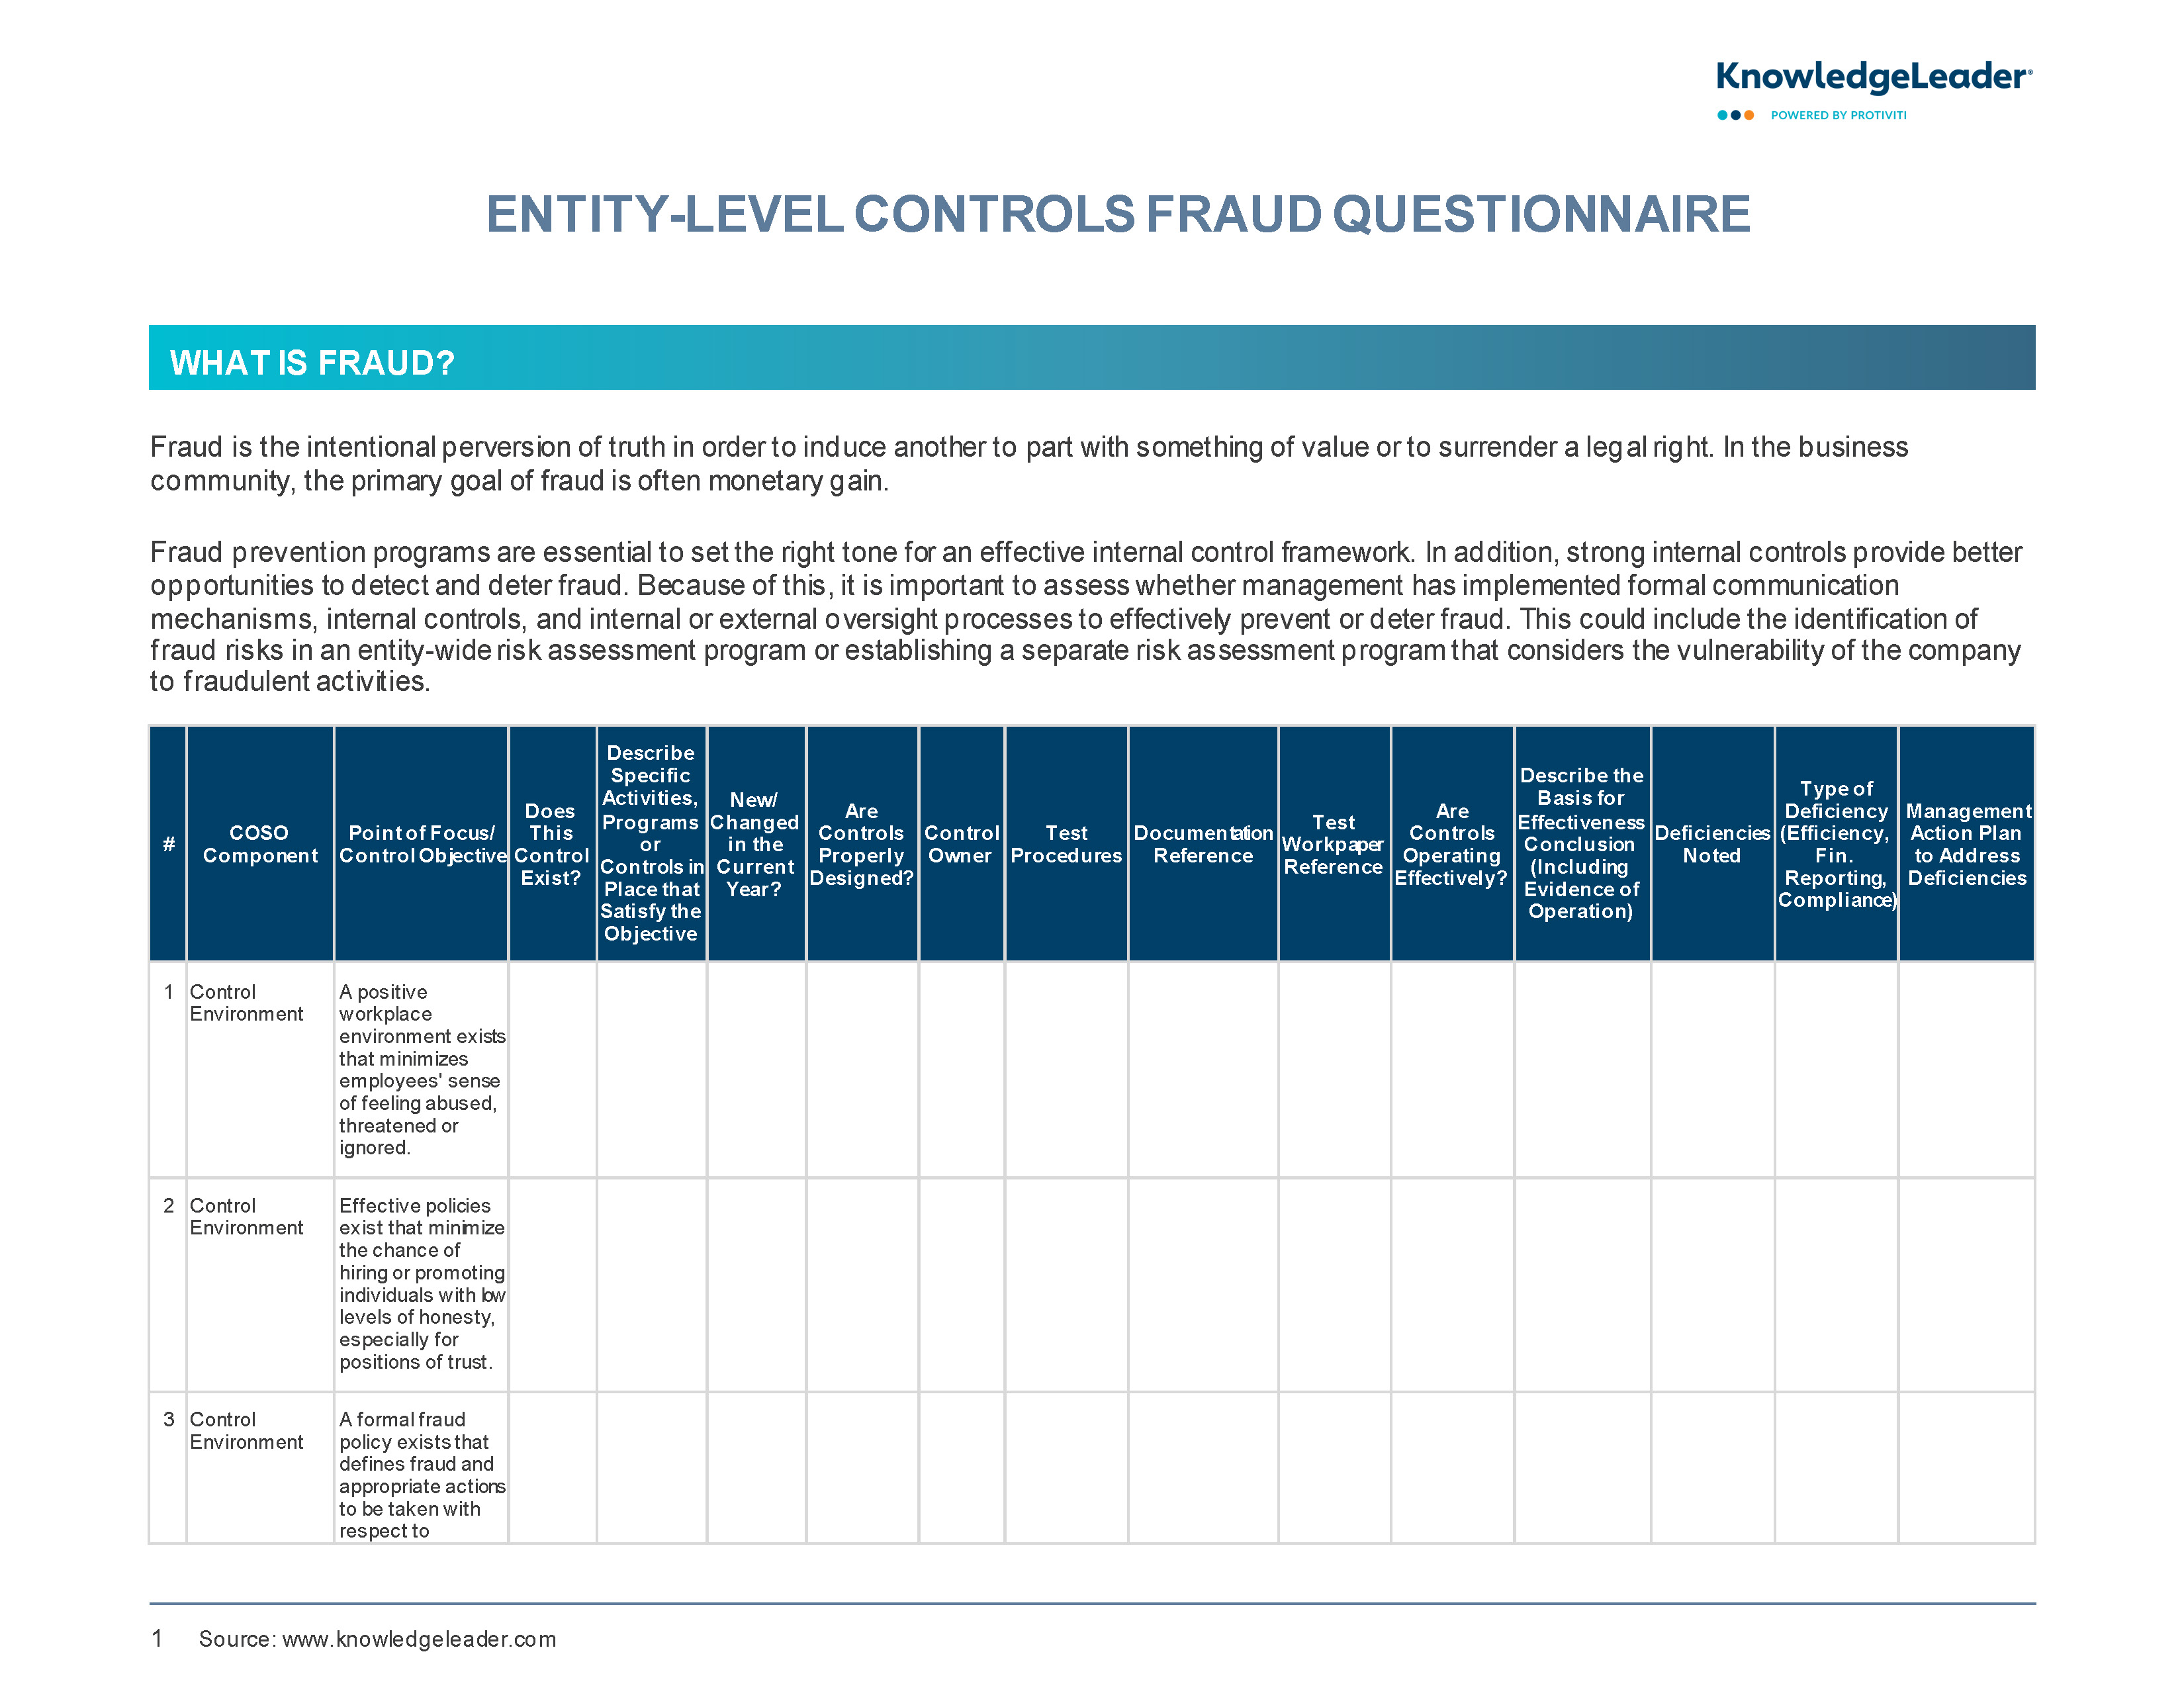 Screenshot of the first page of Entity-Level Controls Fraud Questionnaire